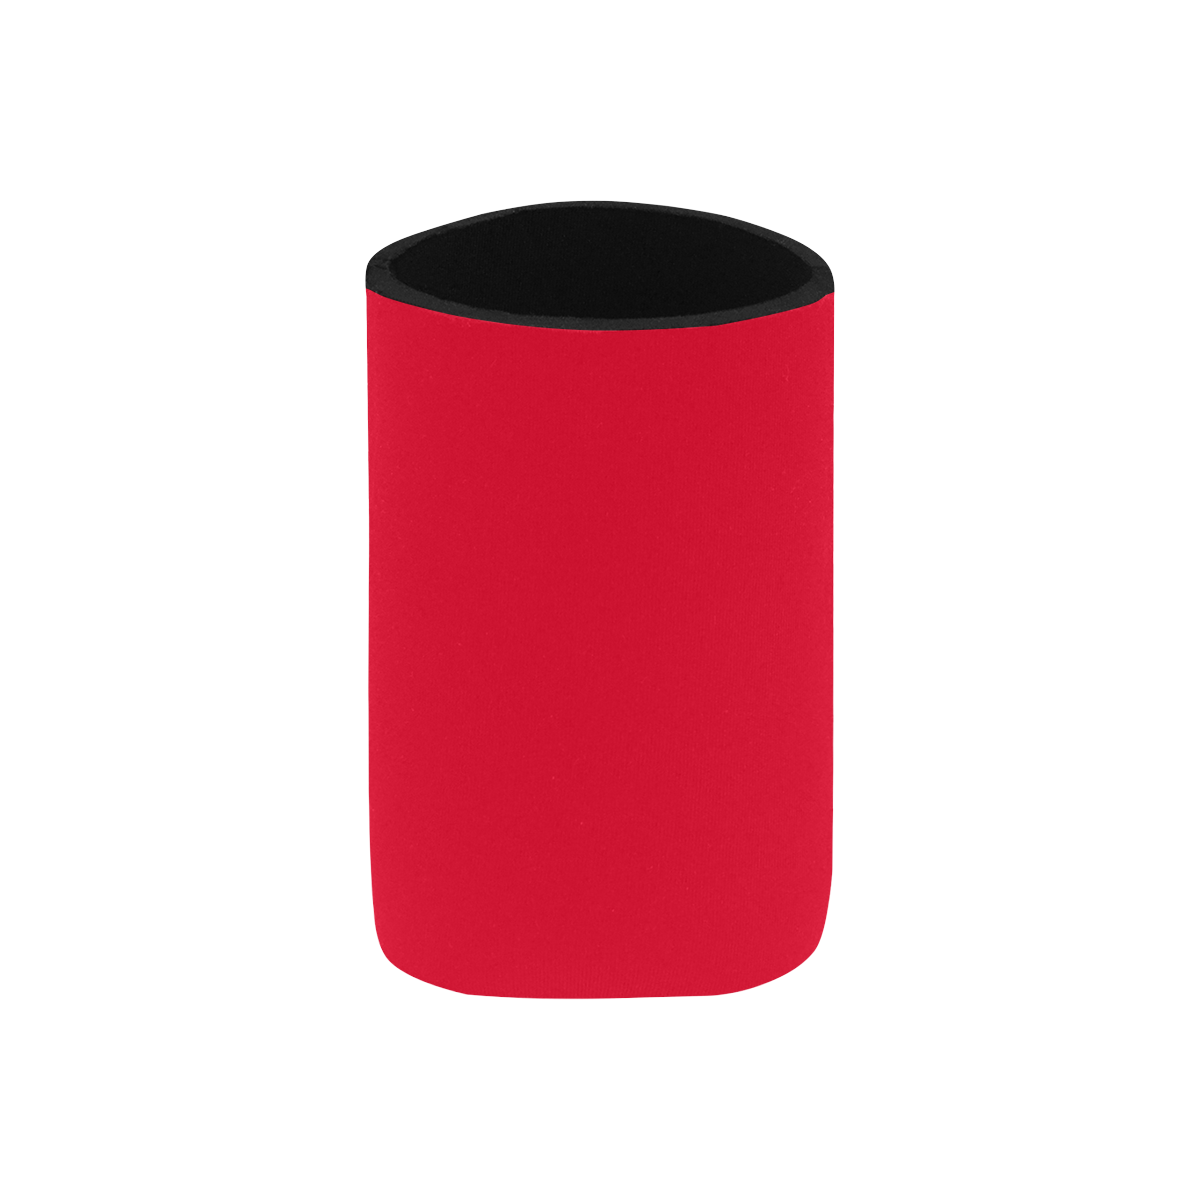 color Spanish red Neoprene Can Cooler 4" x 2.7" dia.